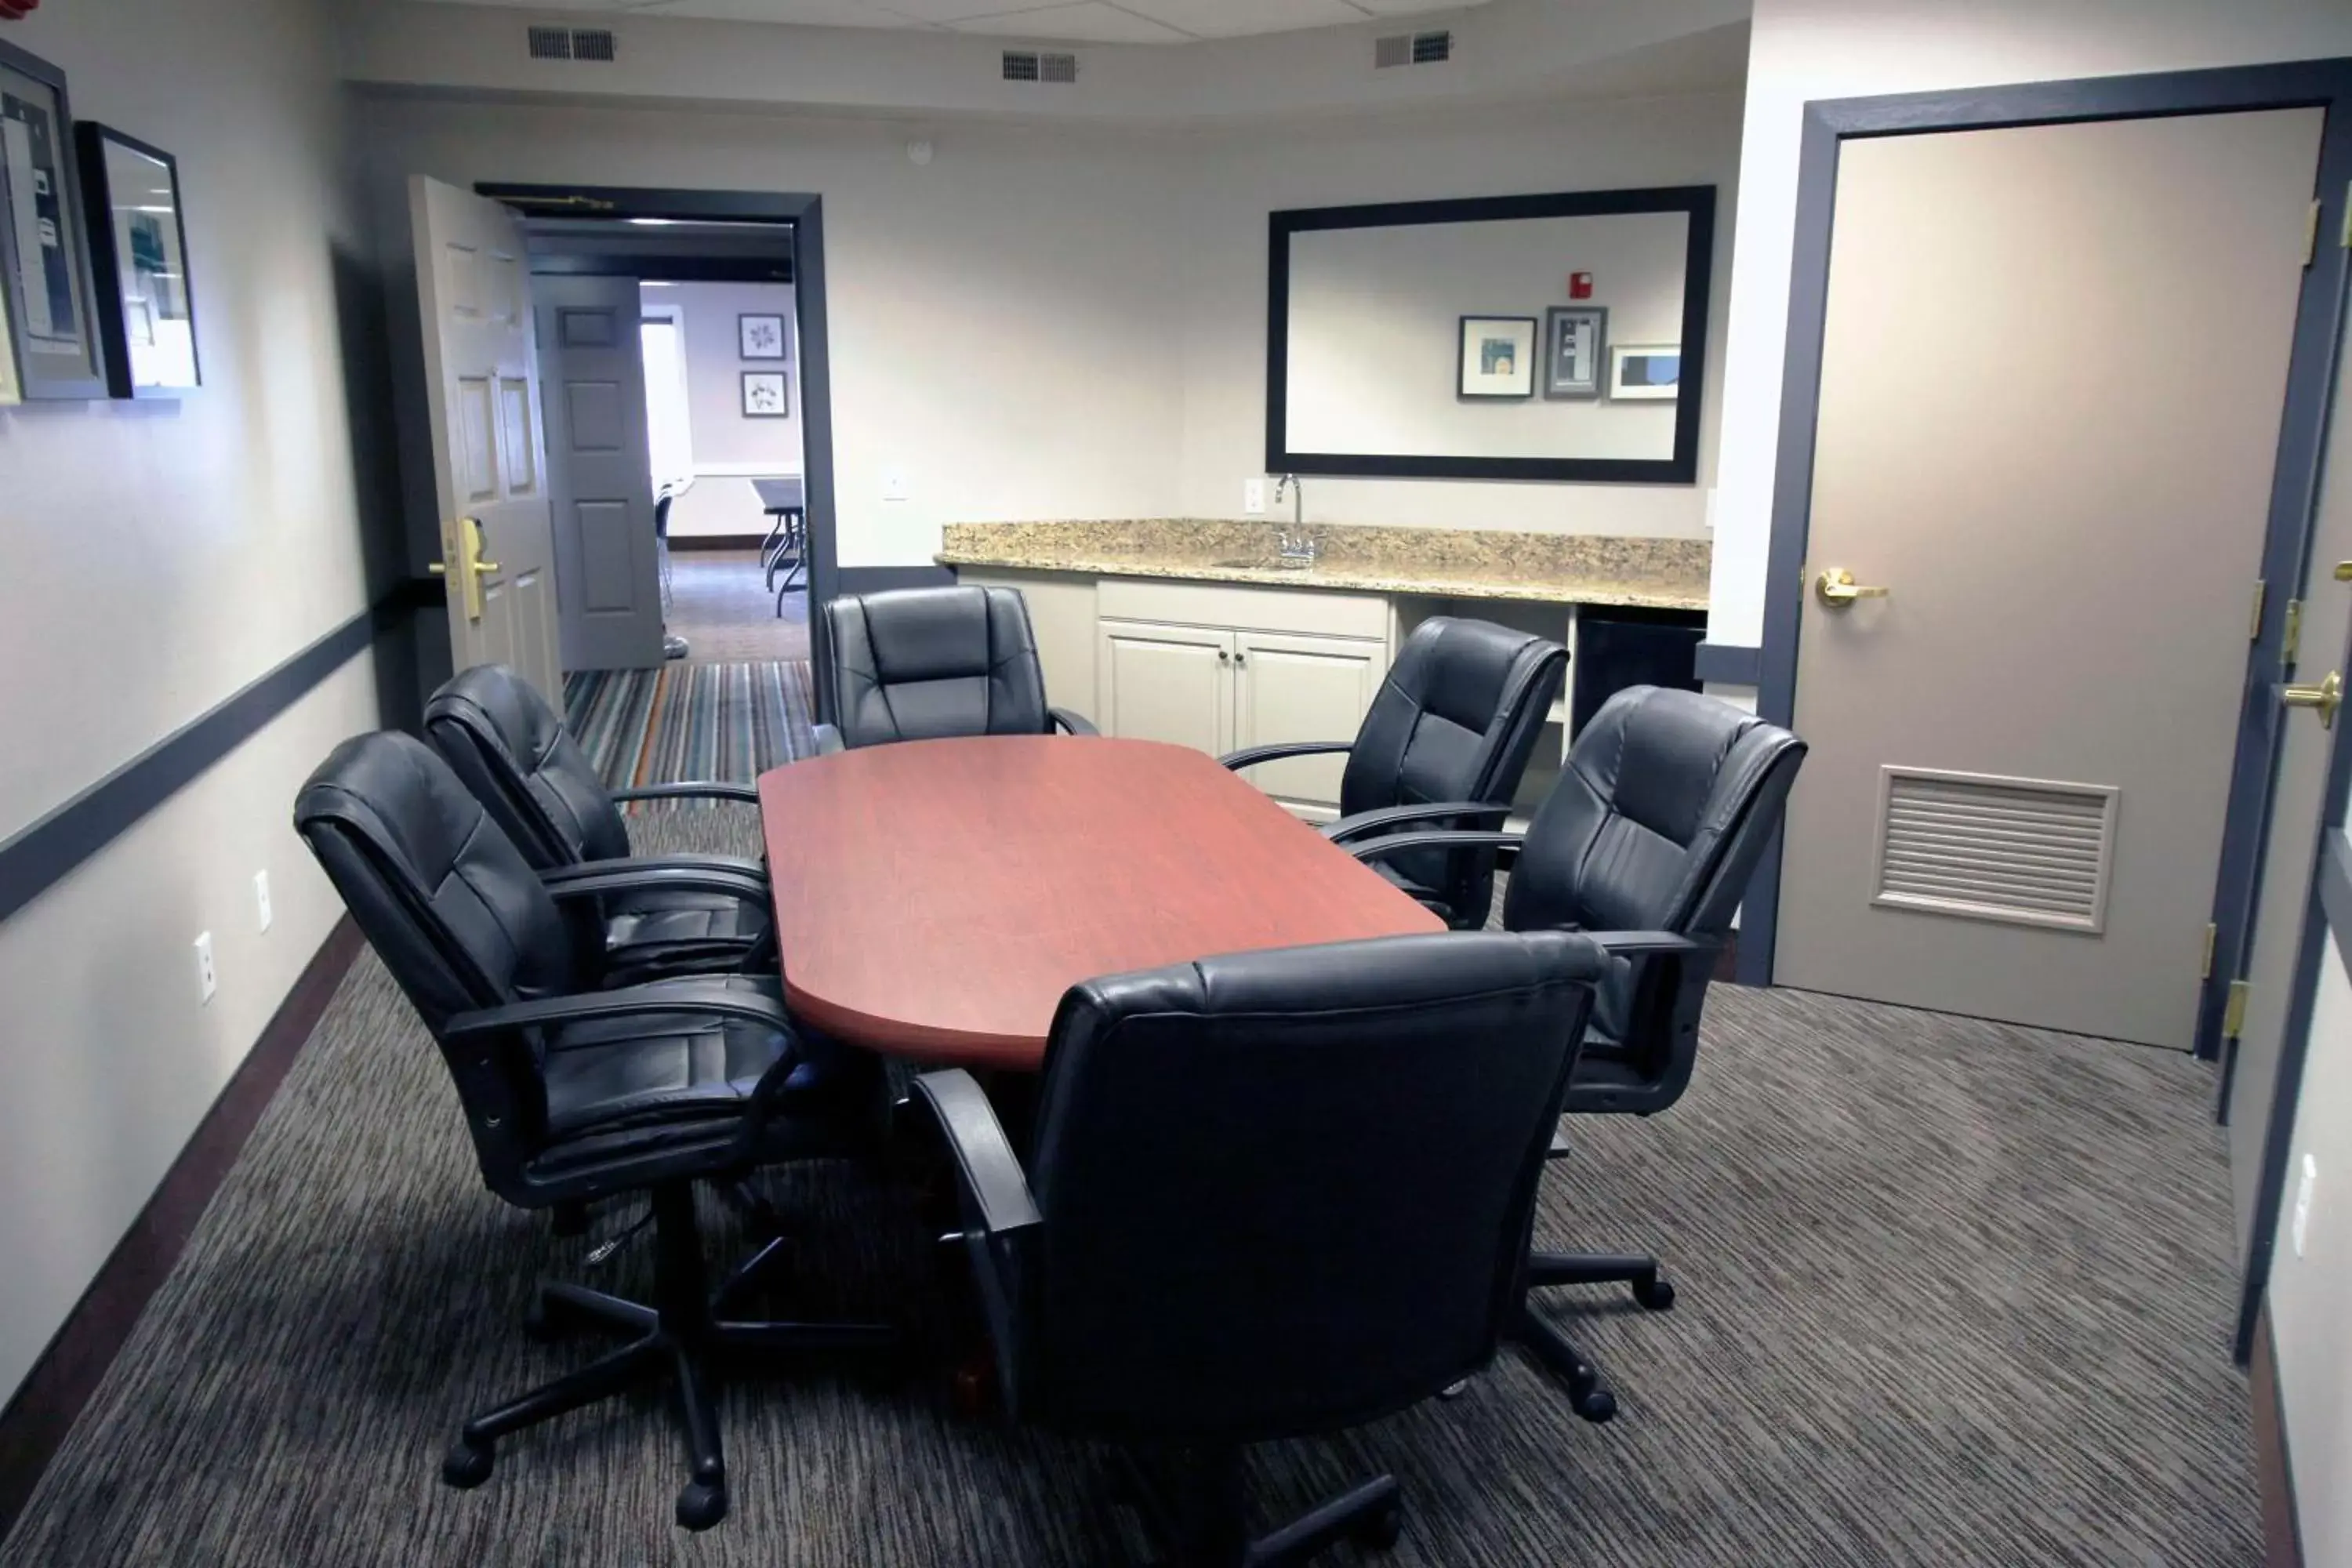 Meeting/conference room, Business Area/Conference Room in Country Inn & Suites by Radisson, Council Bluffs, IA